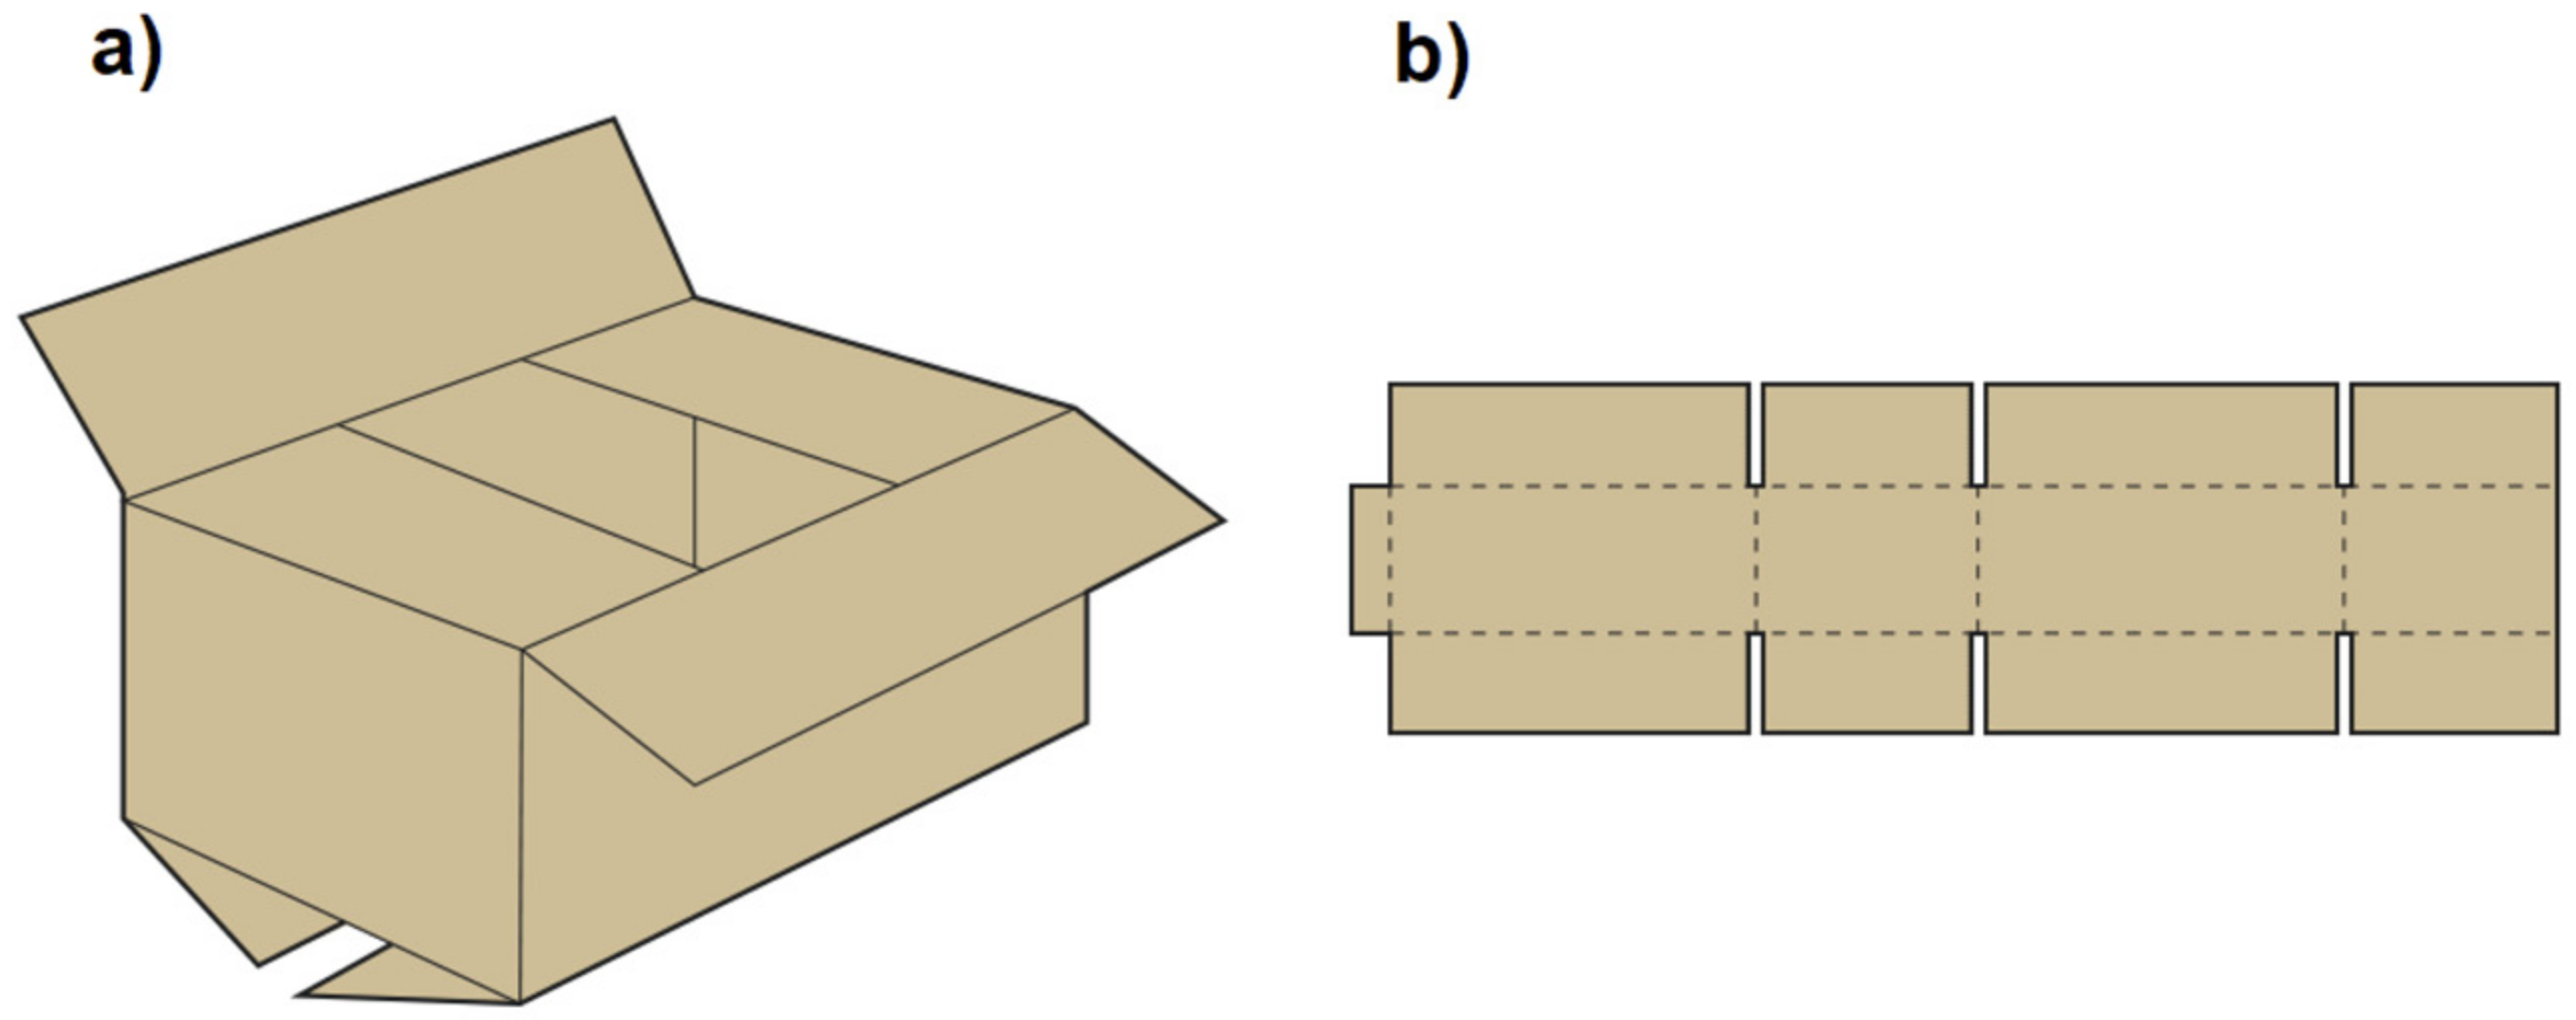 Applied Sciences | Free Full-Text | The Effect of Side Wall Cutout Sizes on Corrugated  Box Compression Strength in the Function of Length-to-Width Ratios&mdash;An  Experimental Study